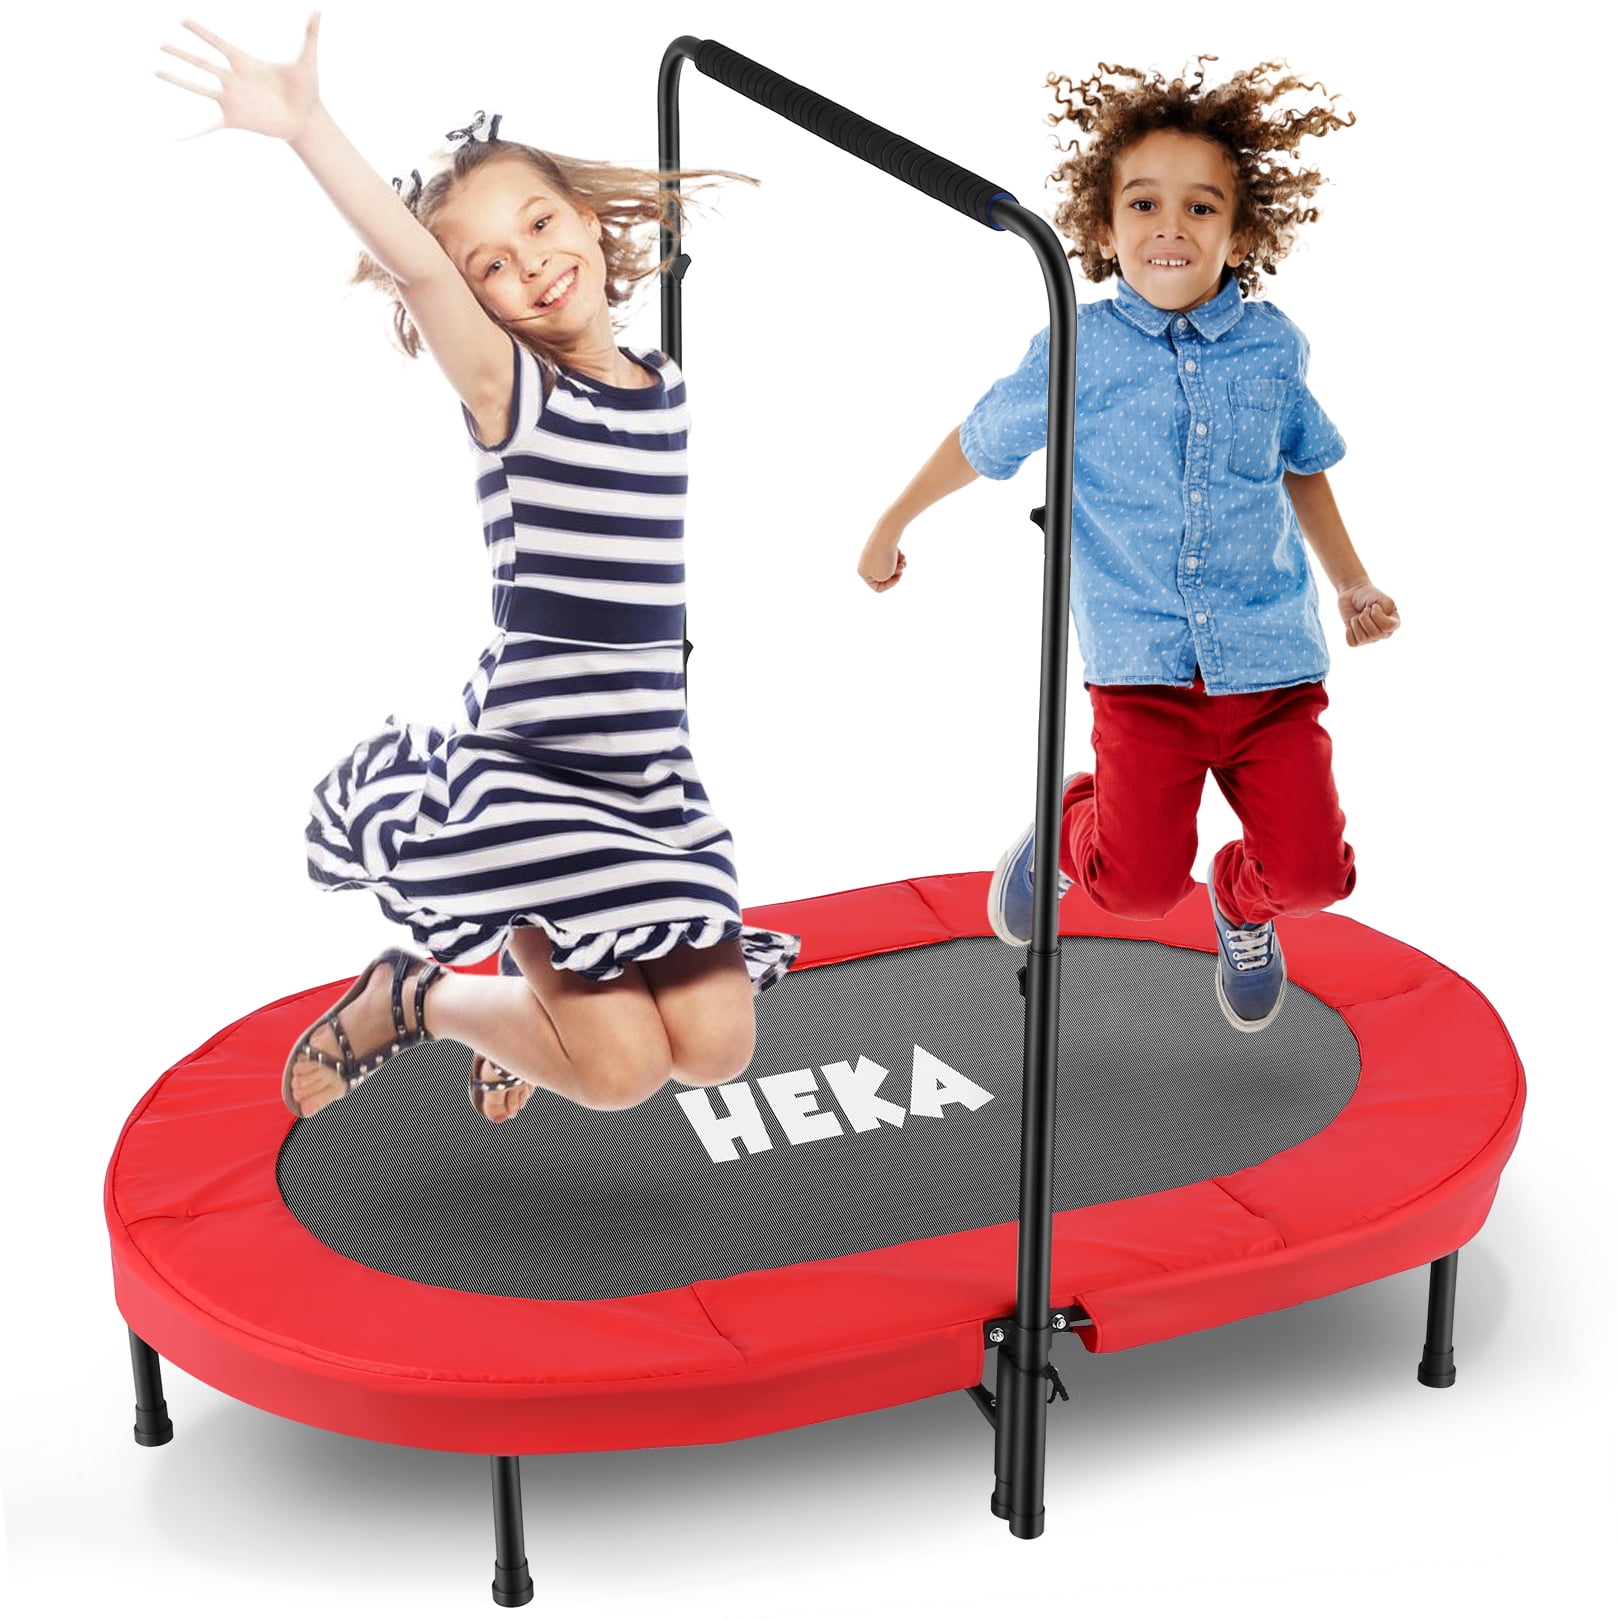 Goplus Folding Fitness Trampoline for Kids 47-Inch Mini Kids Indoor Rebounder with Safety Padded Cover Portable Trampoline for Kids Adults Play Exercise